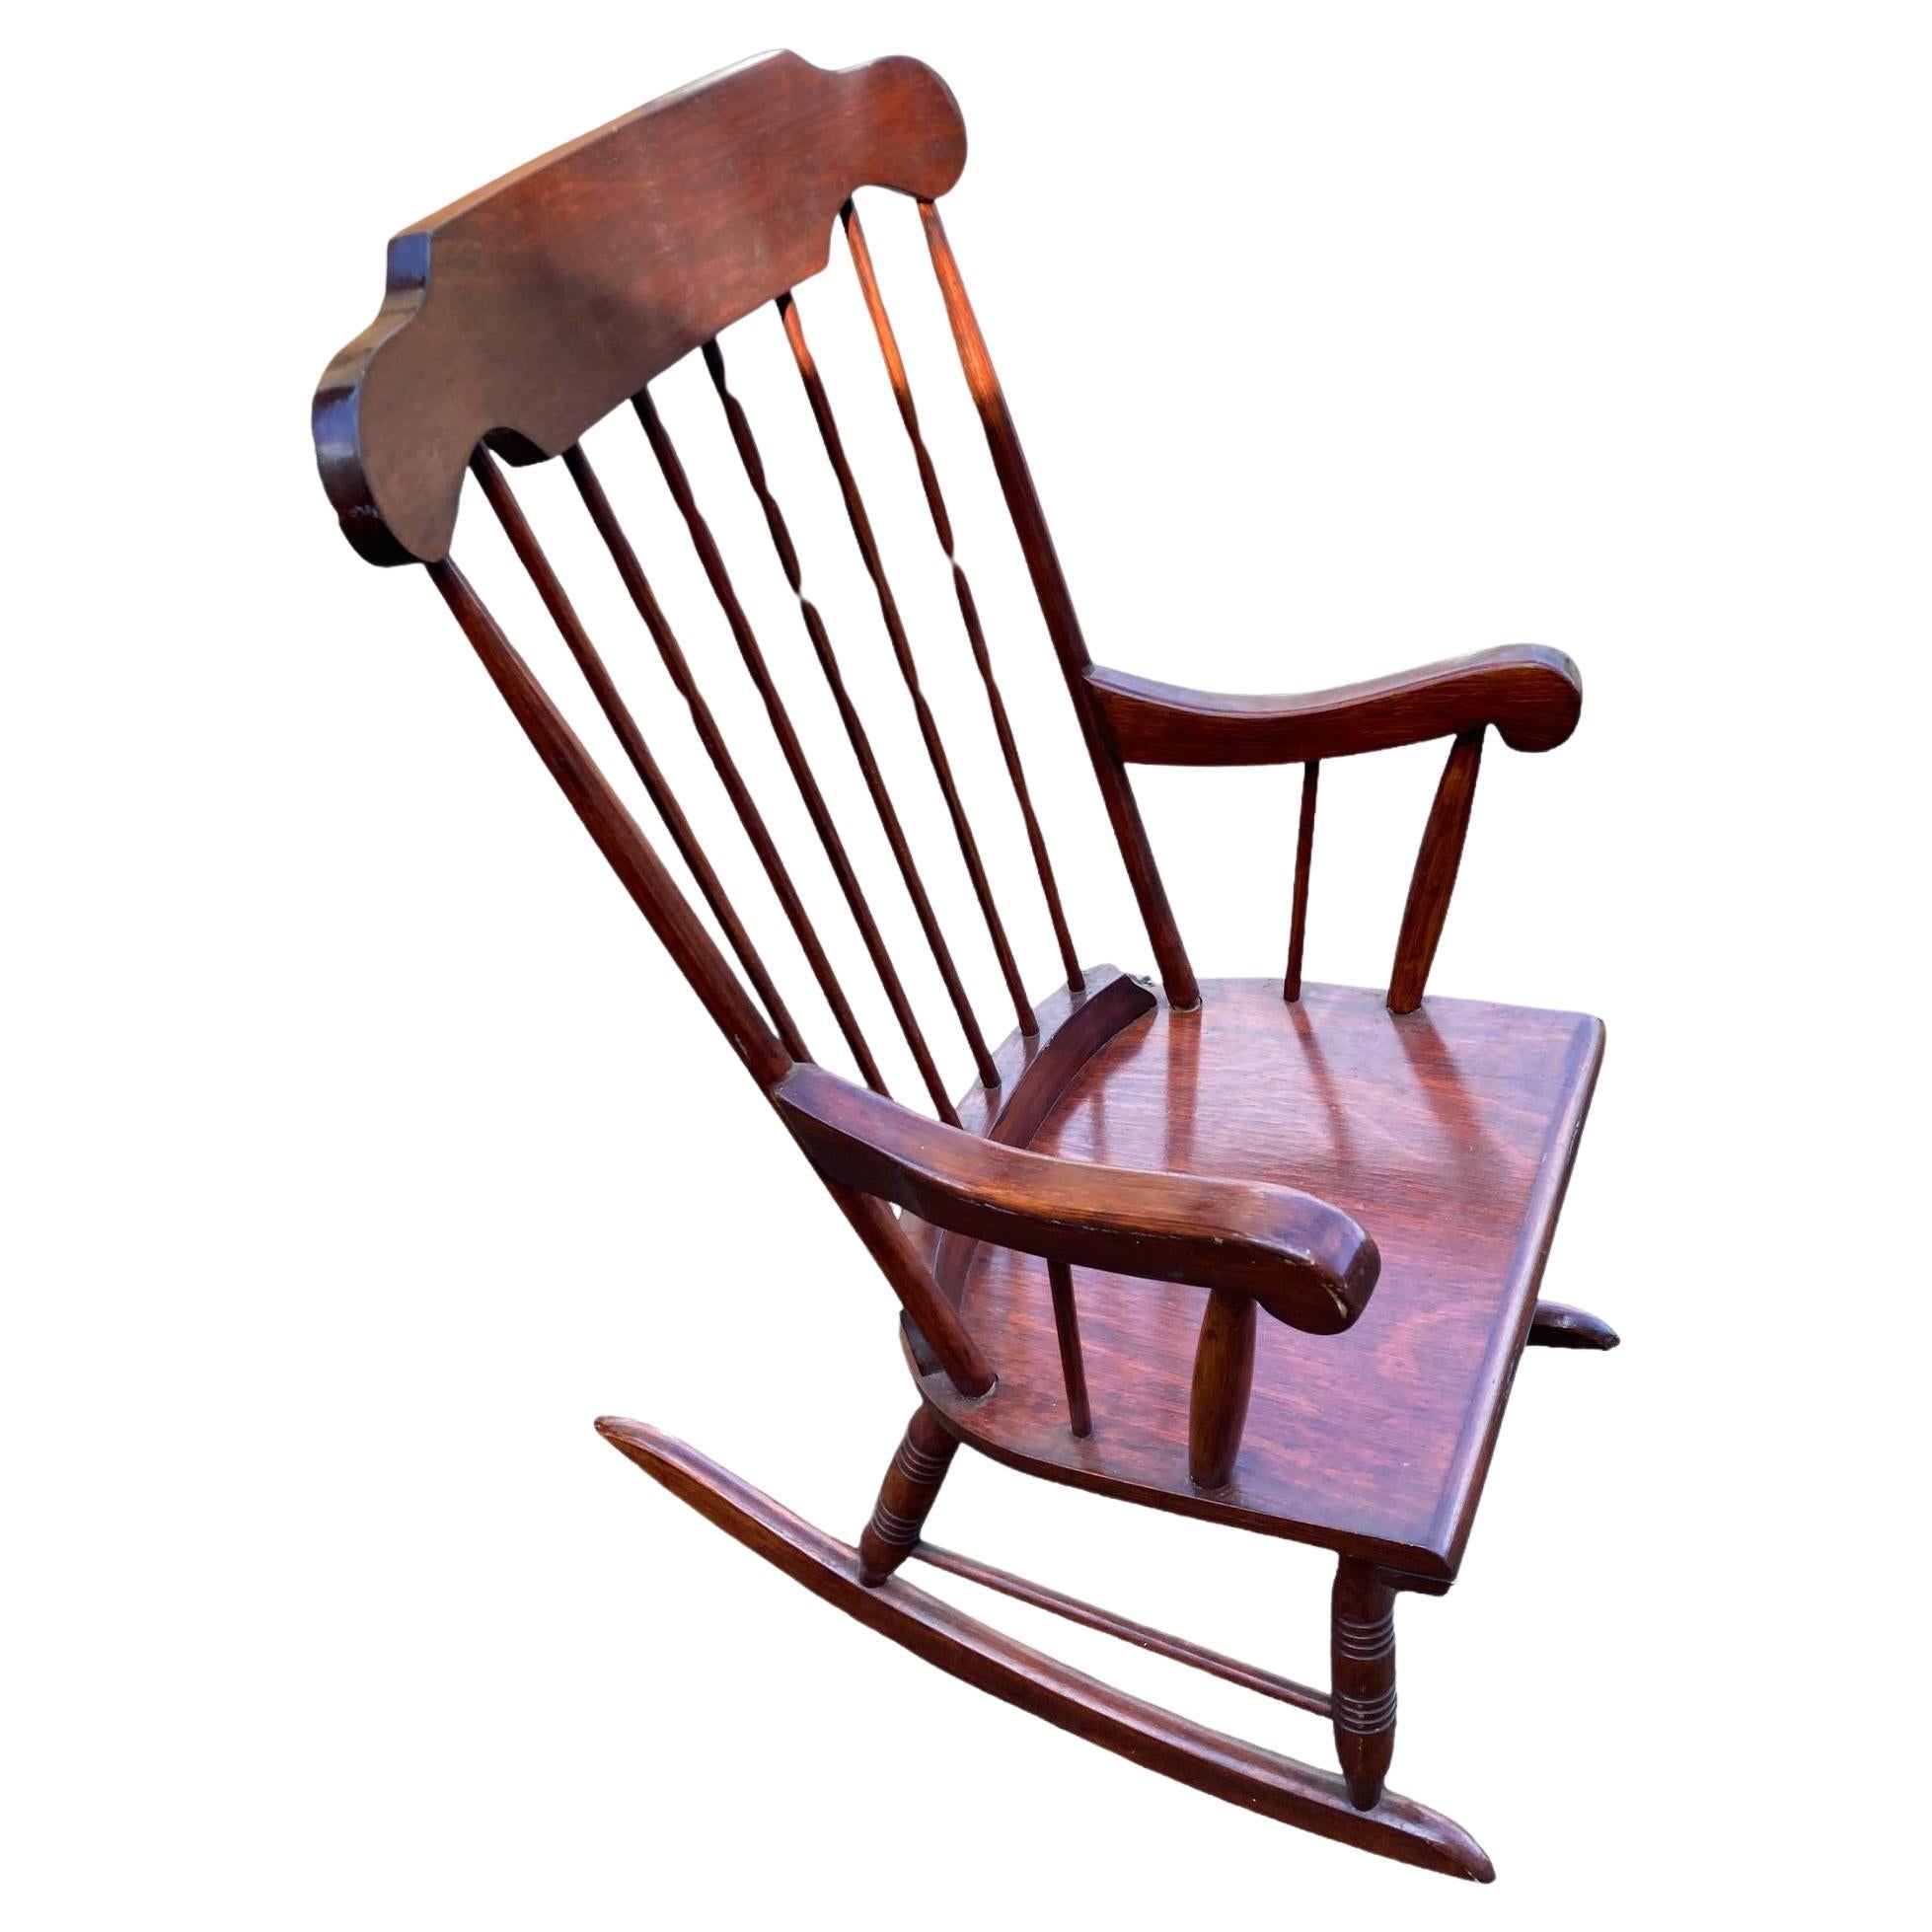 Windsor style rocking chair, Mid 20th Century, Red Mahogany wood